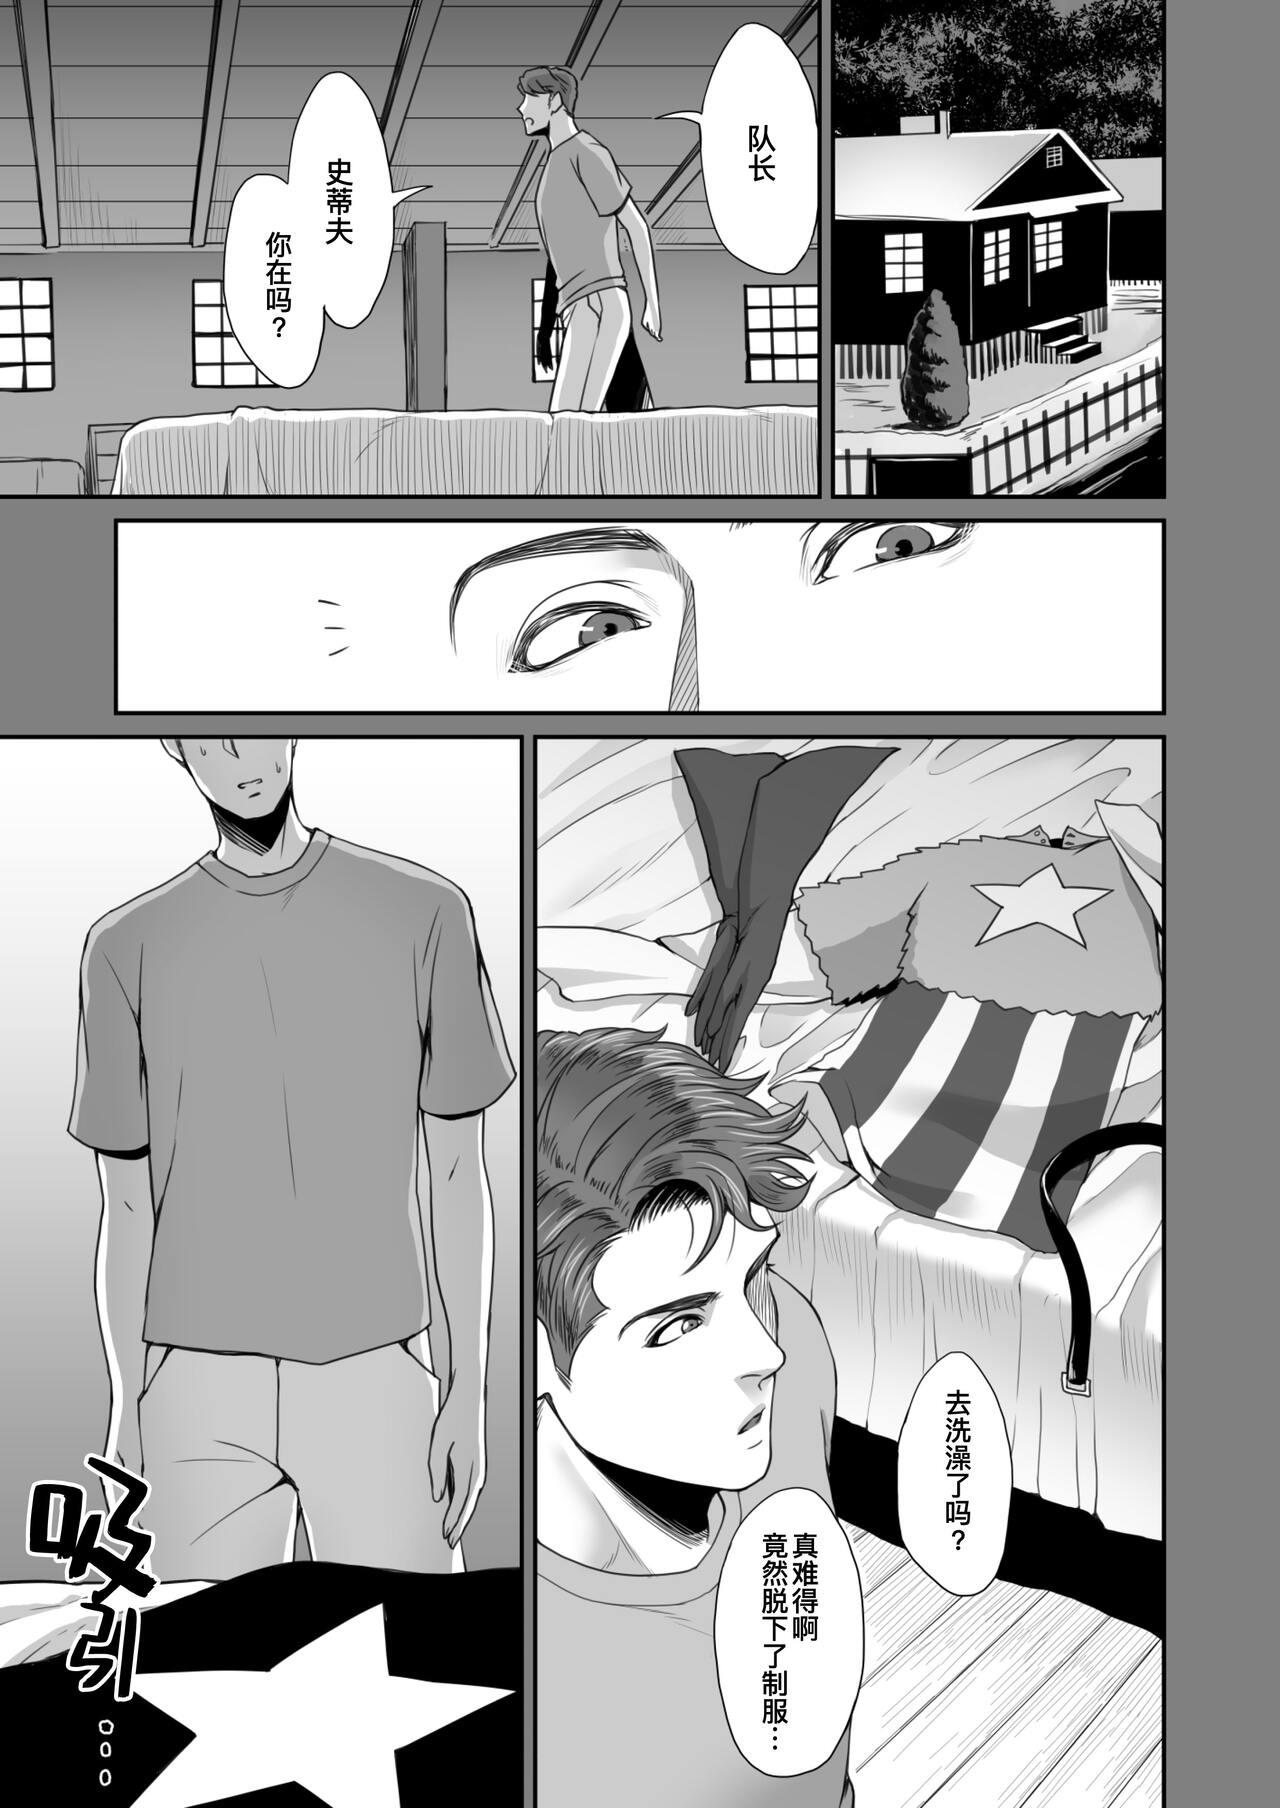 Watersports NO HEROES Our love and hate relationship | 不再需要英雄 - 关于我们之间的爱恨情仇 - Avengers Machine - Page 3